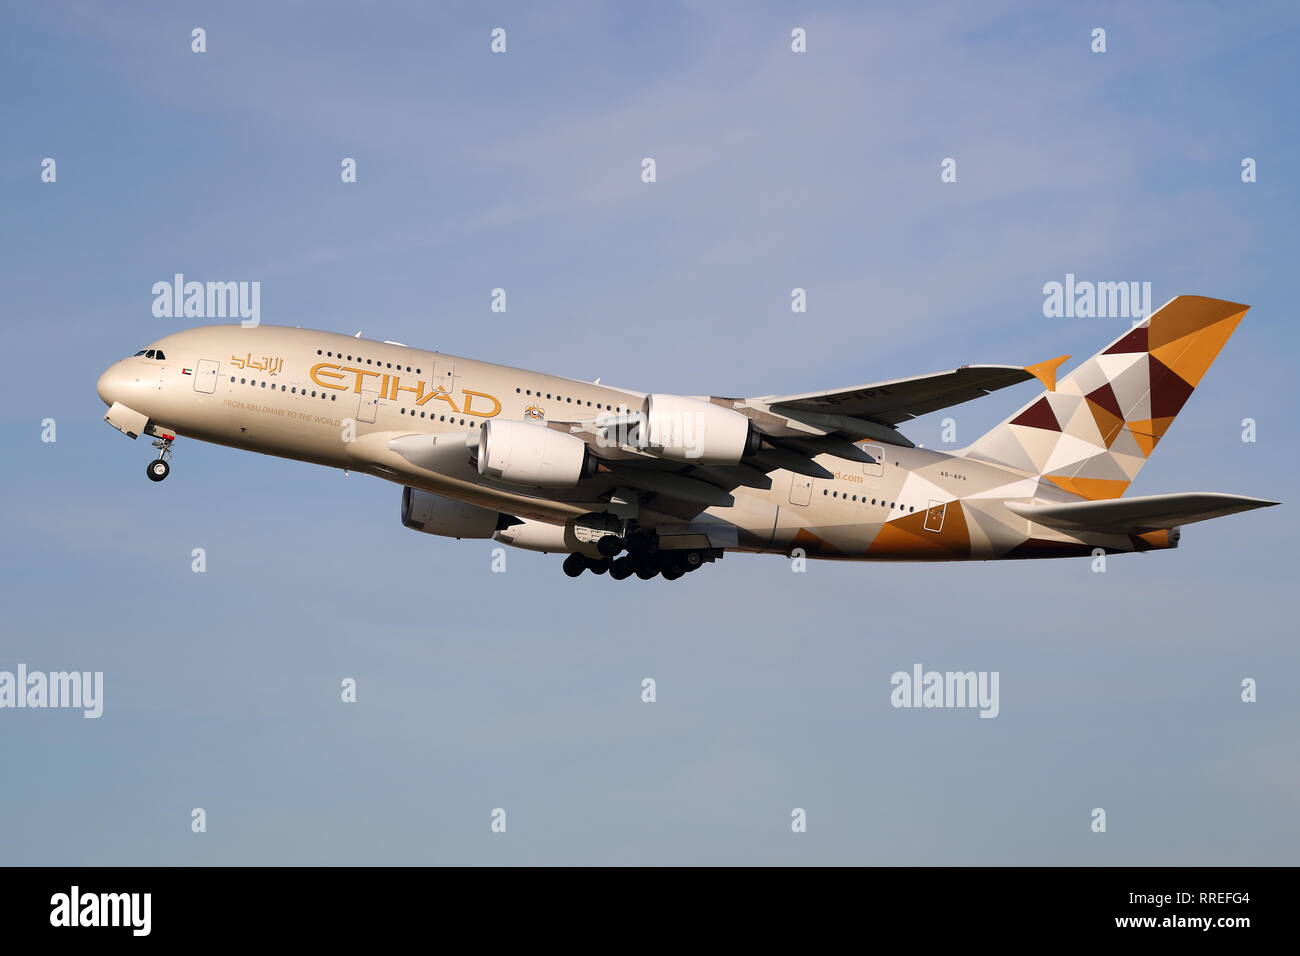 Etihad Airways Airbus A380  A6-APA taking off from London Heathrow Airport, UK Stock Photo